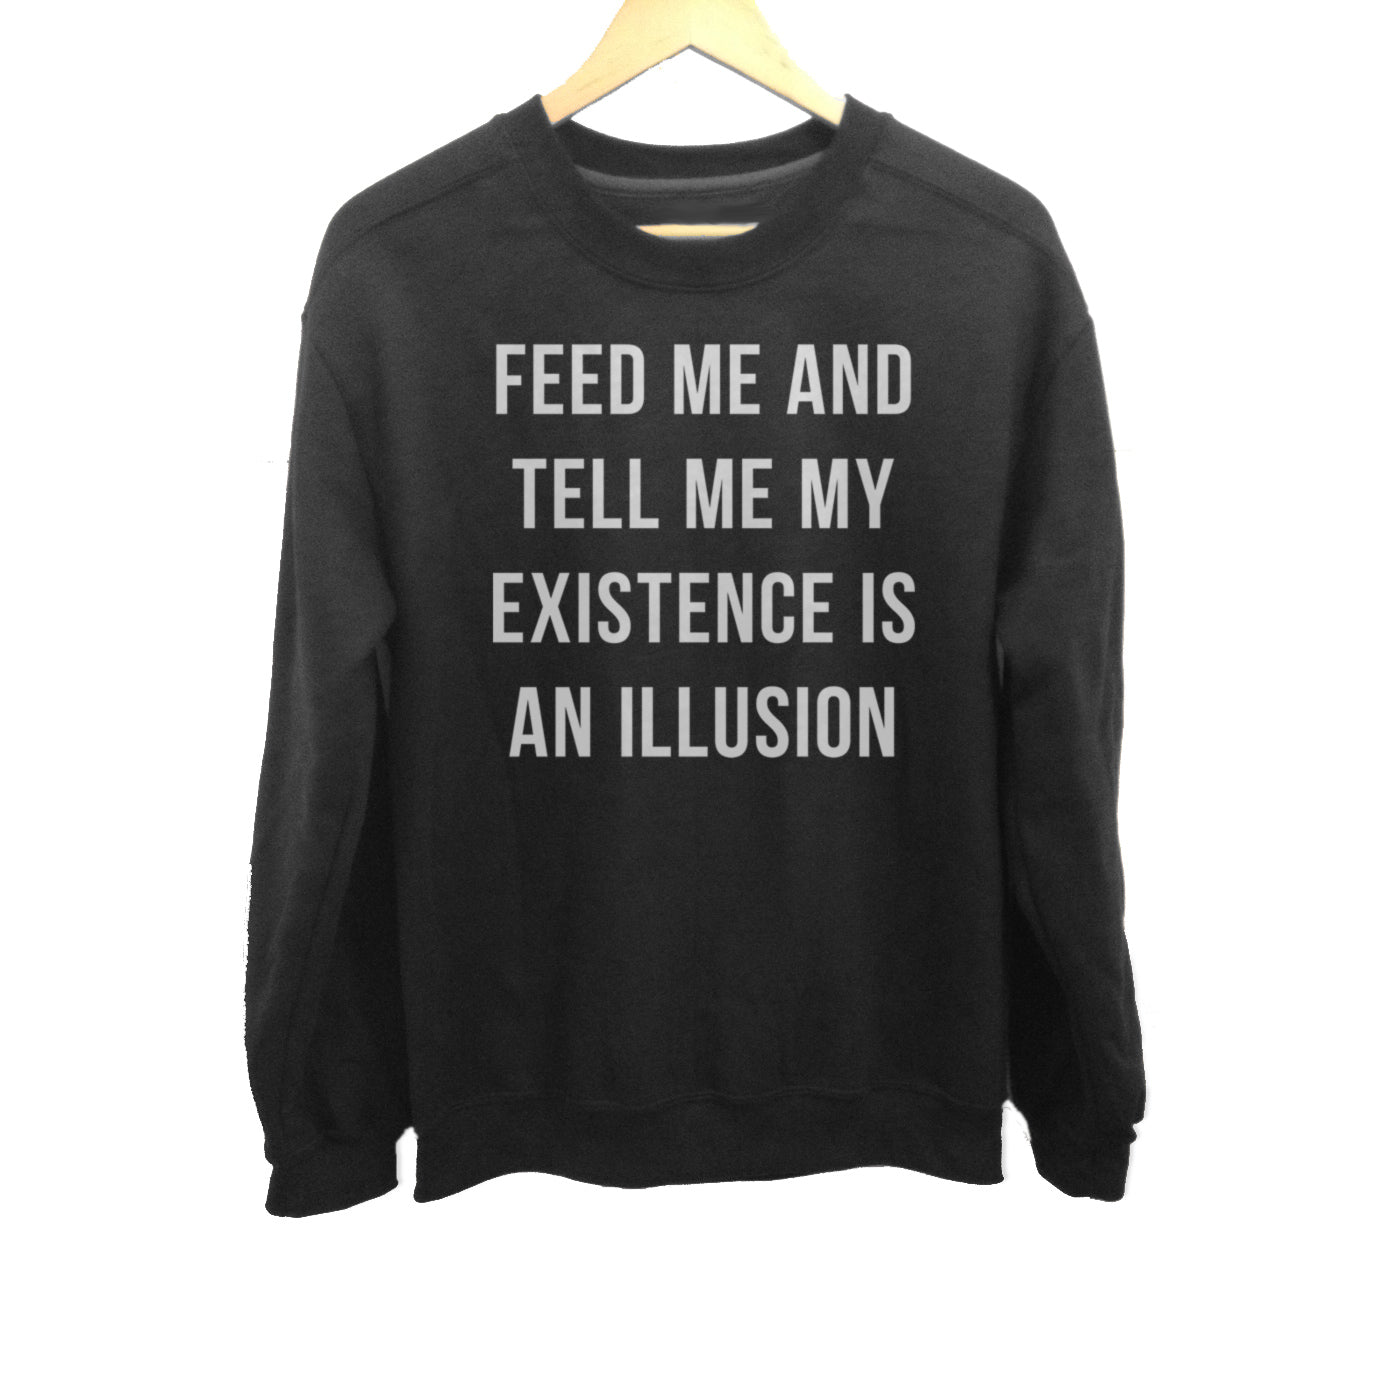 Unisex Feed Me and Tell Me My Existence is an Illusion Sweatshirt - Existentialism Shirt